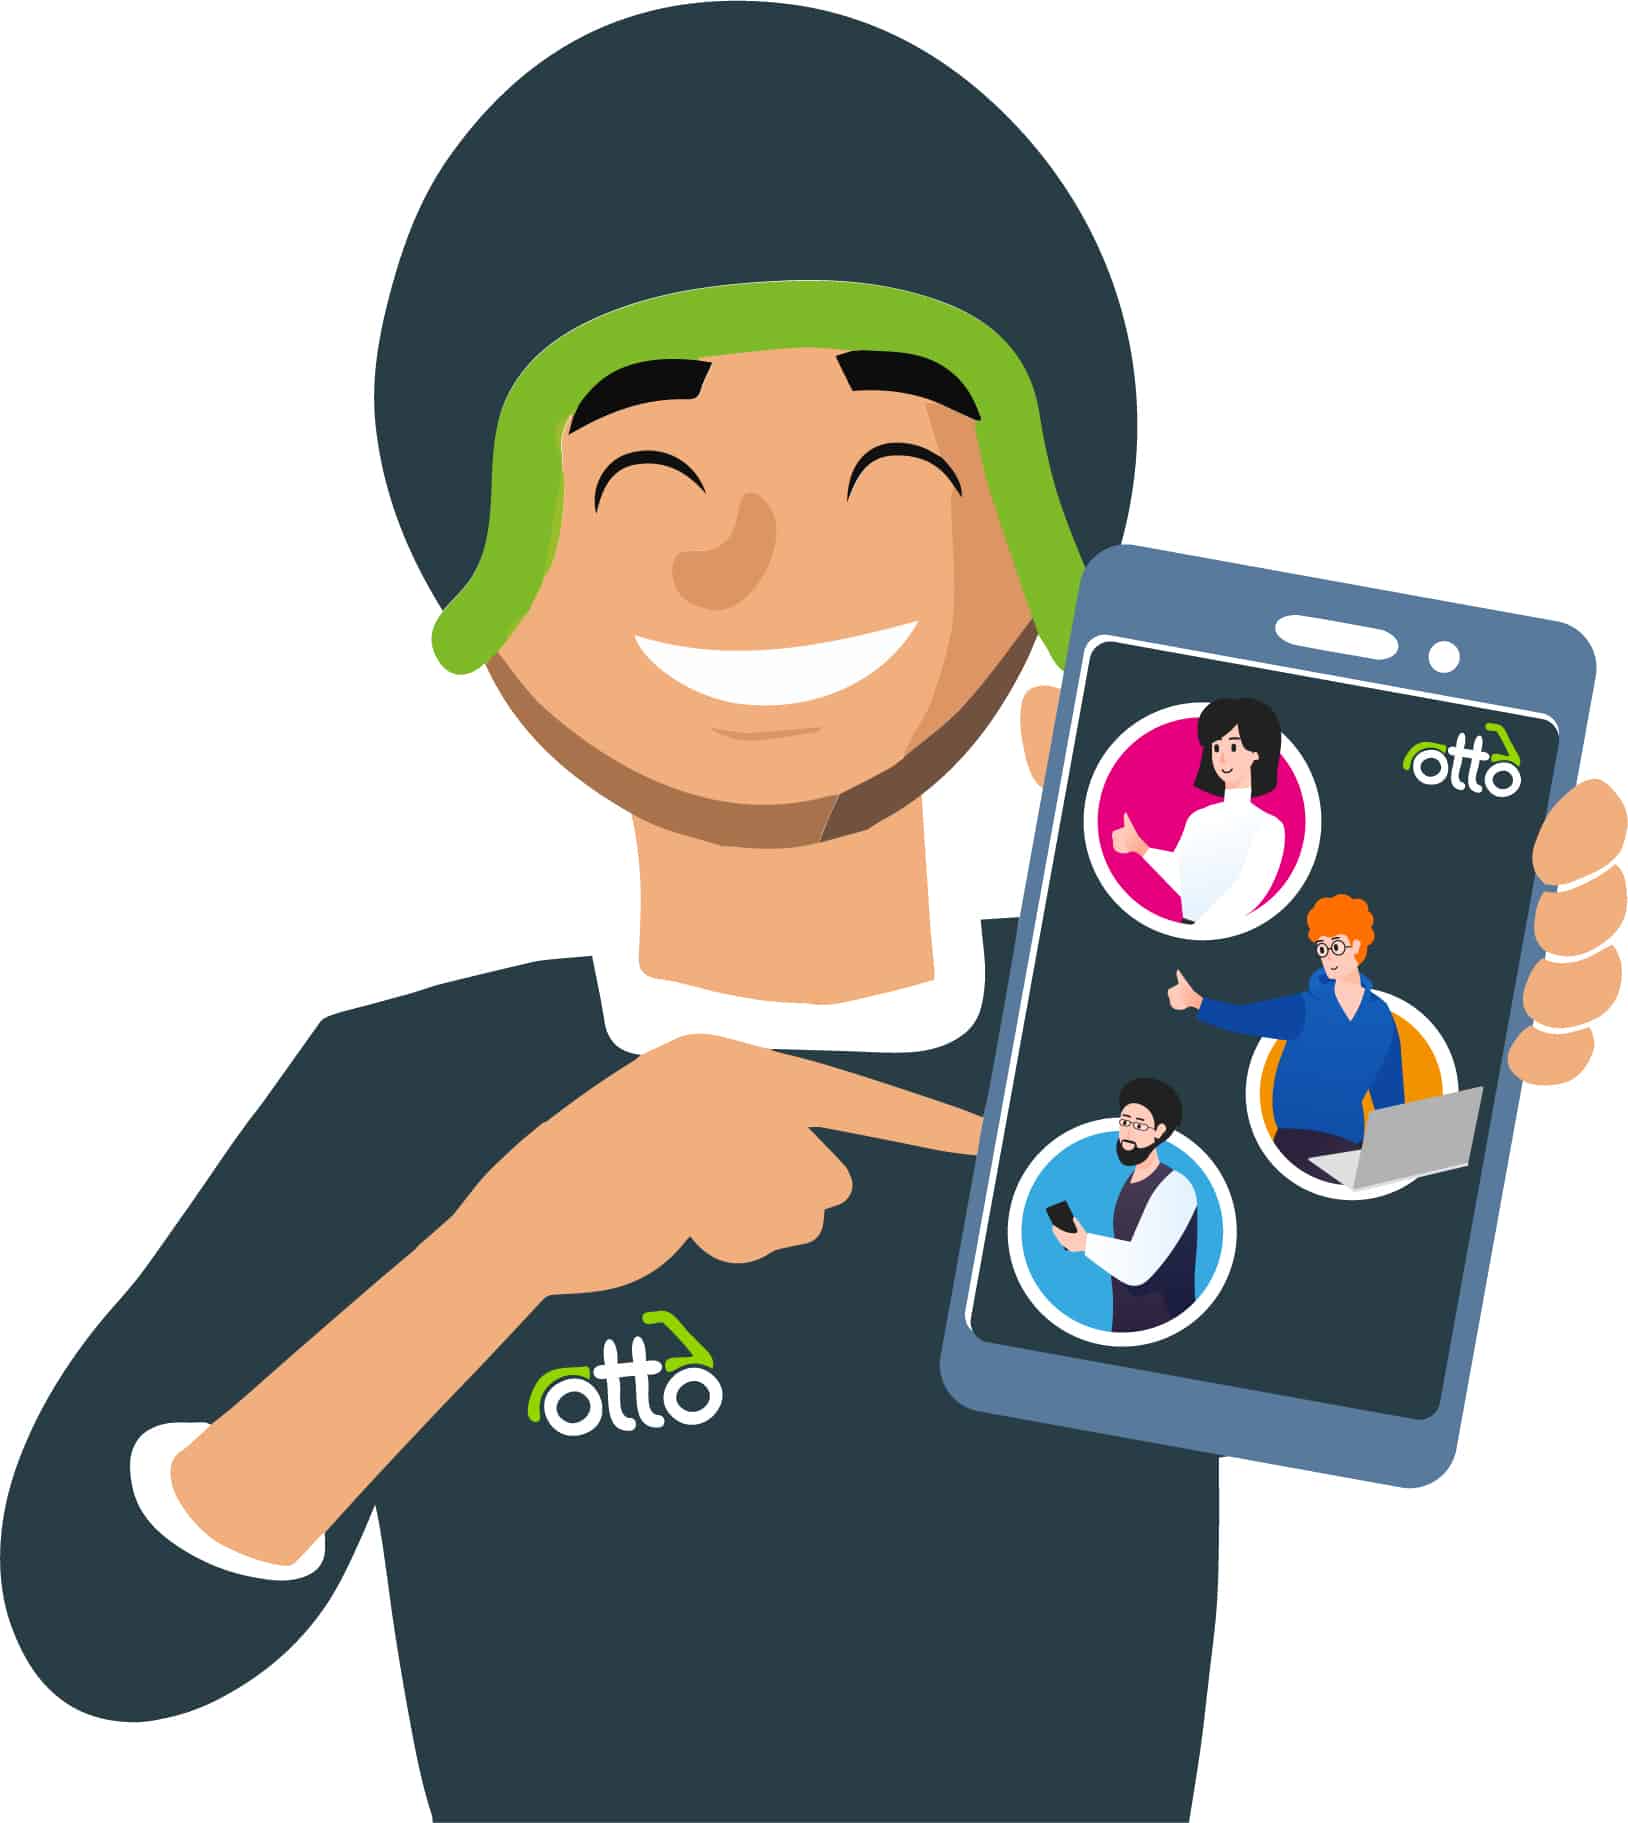 Animation With Otto Delivery Rider Holding His Mobile Phone And Showing The Screen, Which Displays The Steps To Refer A Friend